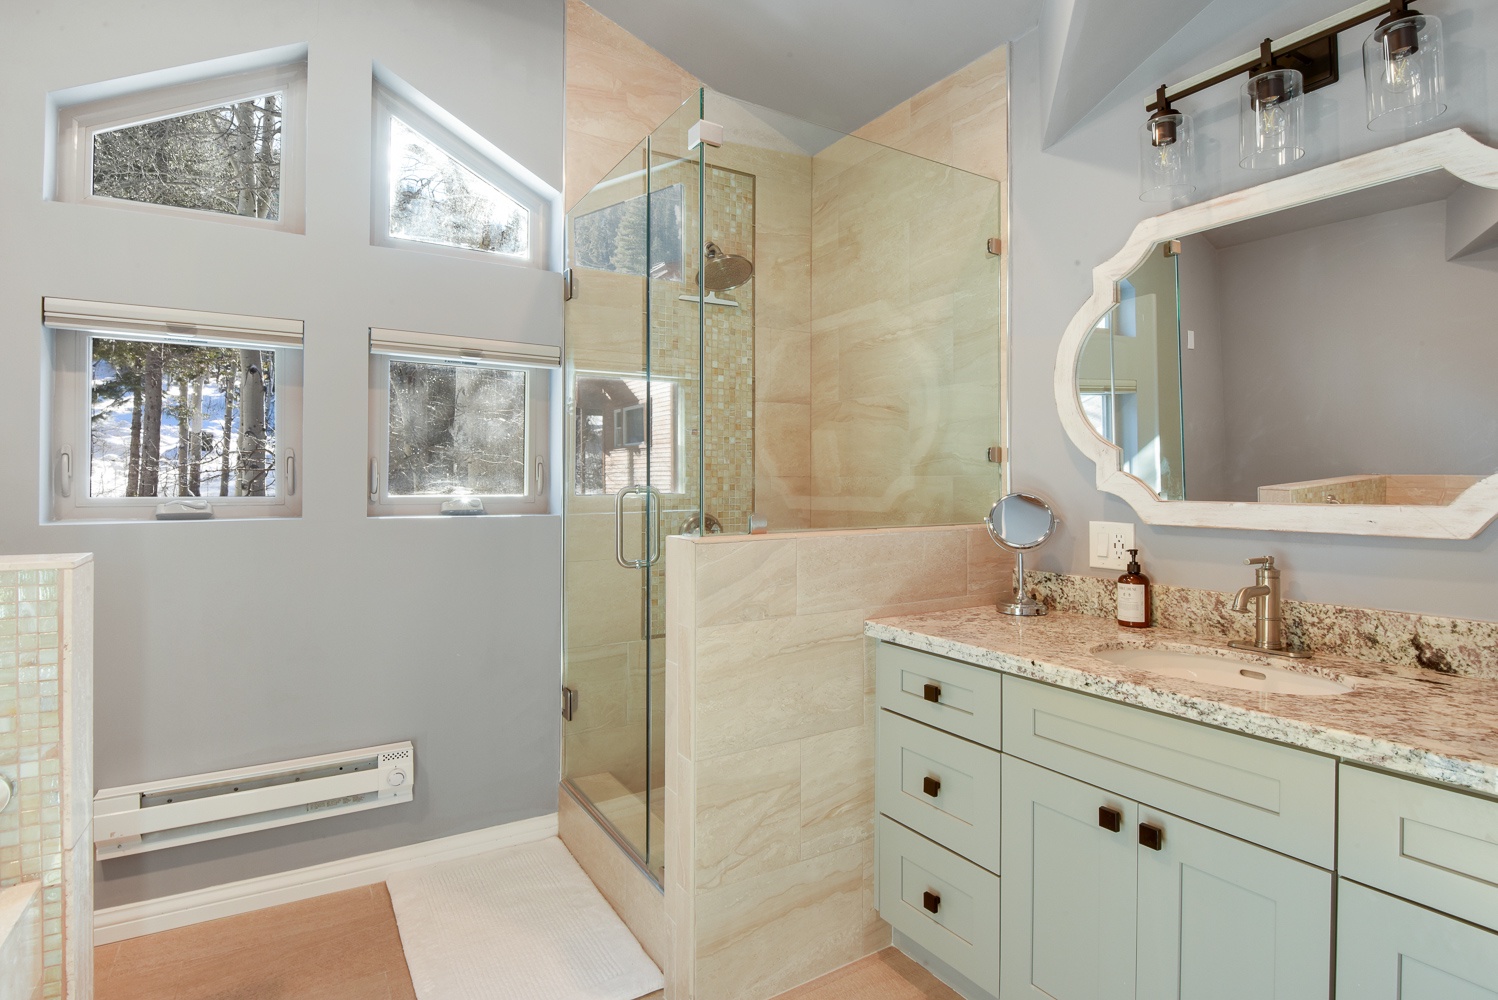 Ensuite bathroom with separate stand up shower, and soaking tub